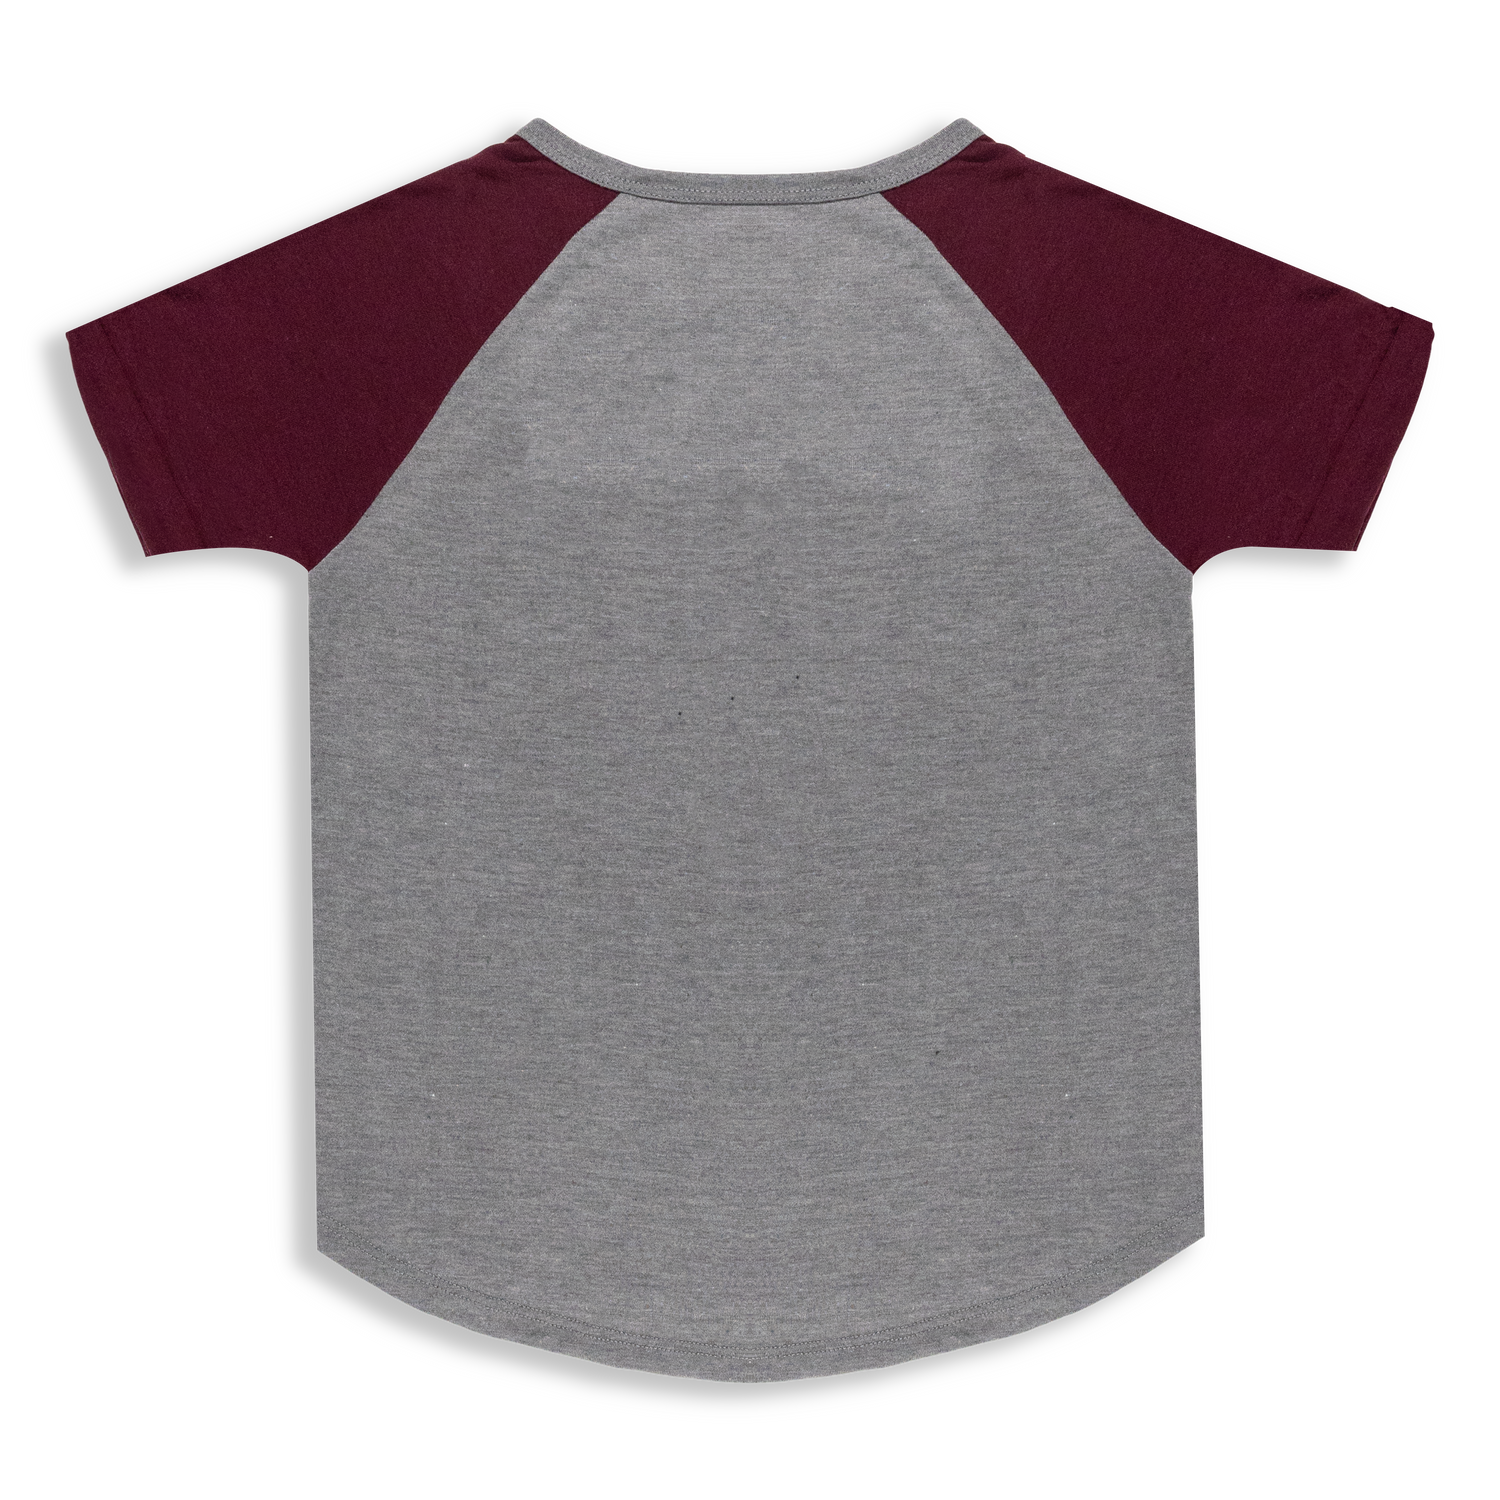 Texas A&M Aggies Gray and Maroon Stars Toddler Girls Tee